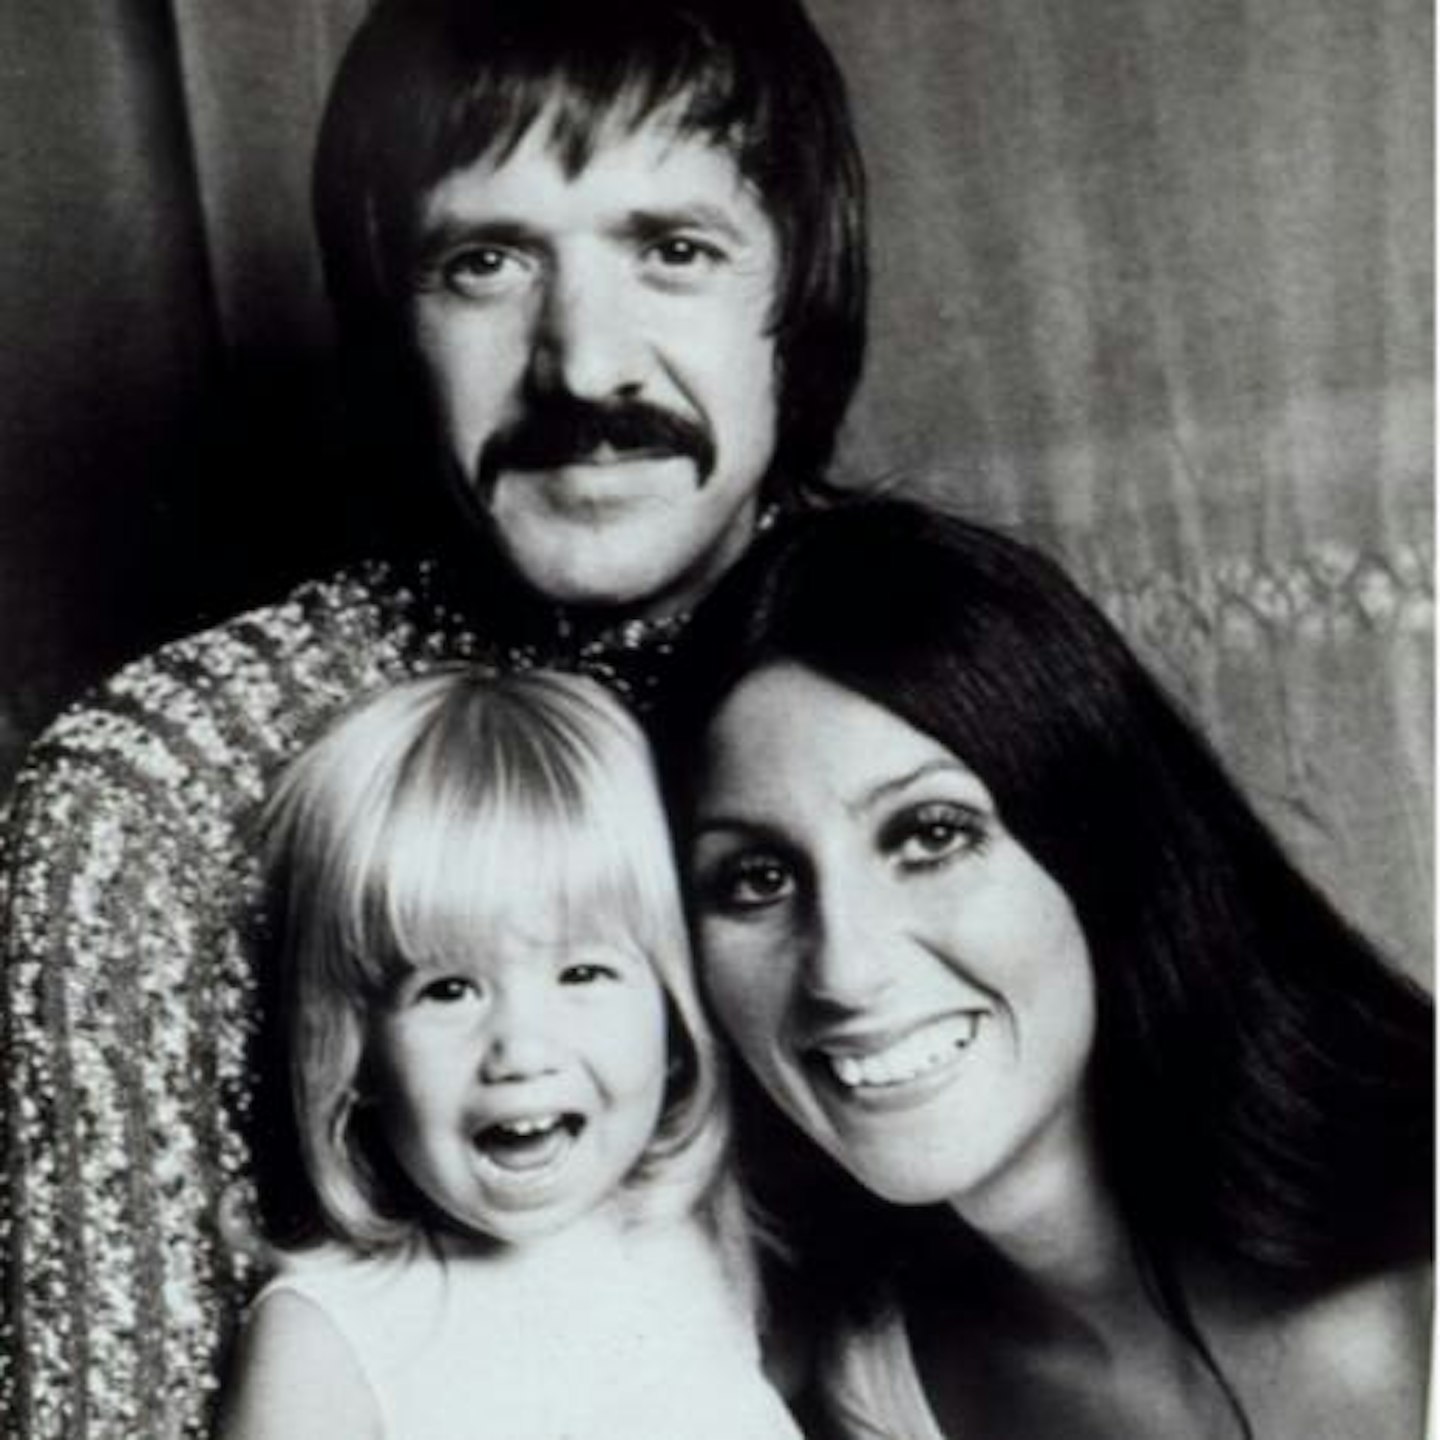 Cher pictured with husband Sonny and their daughter in 1972